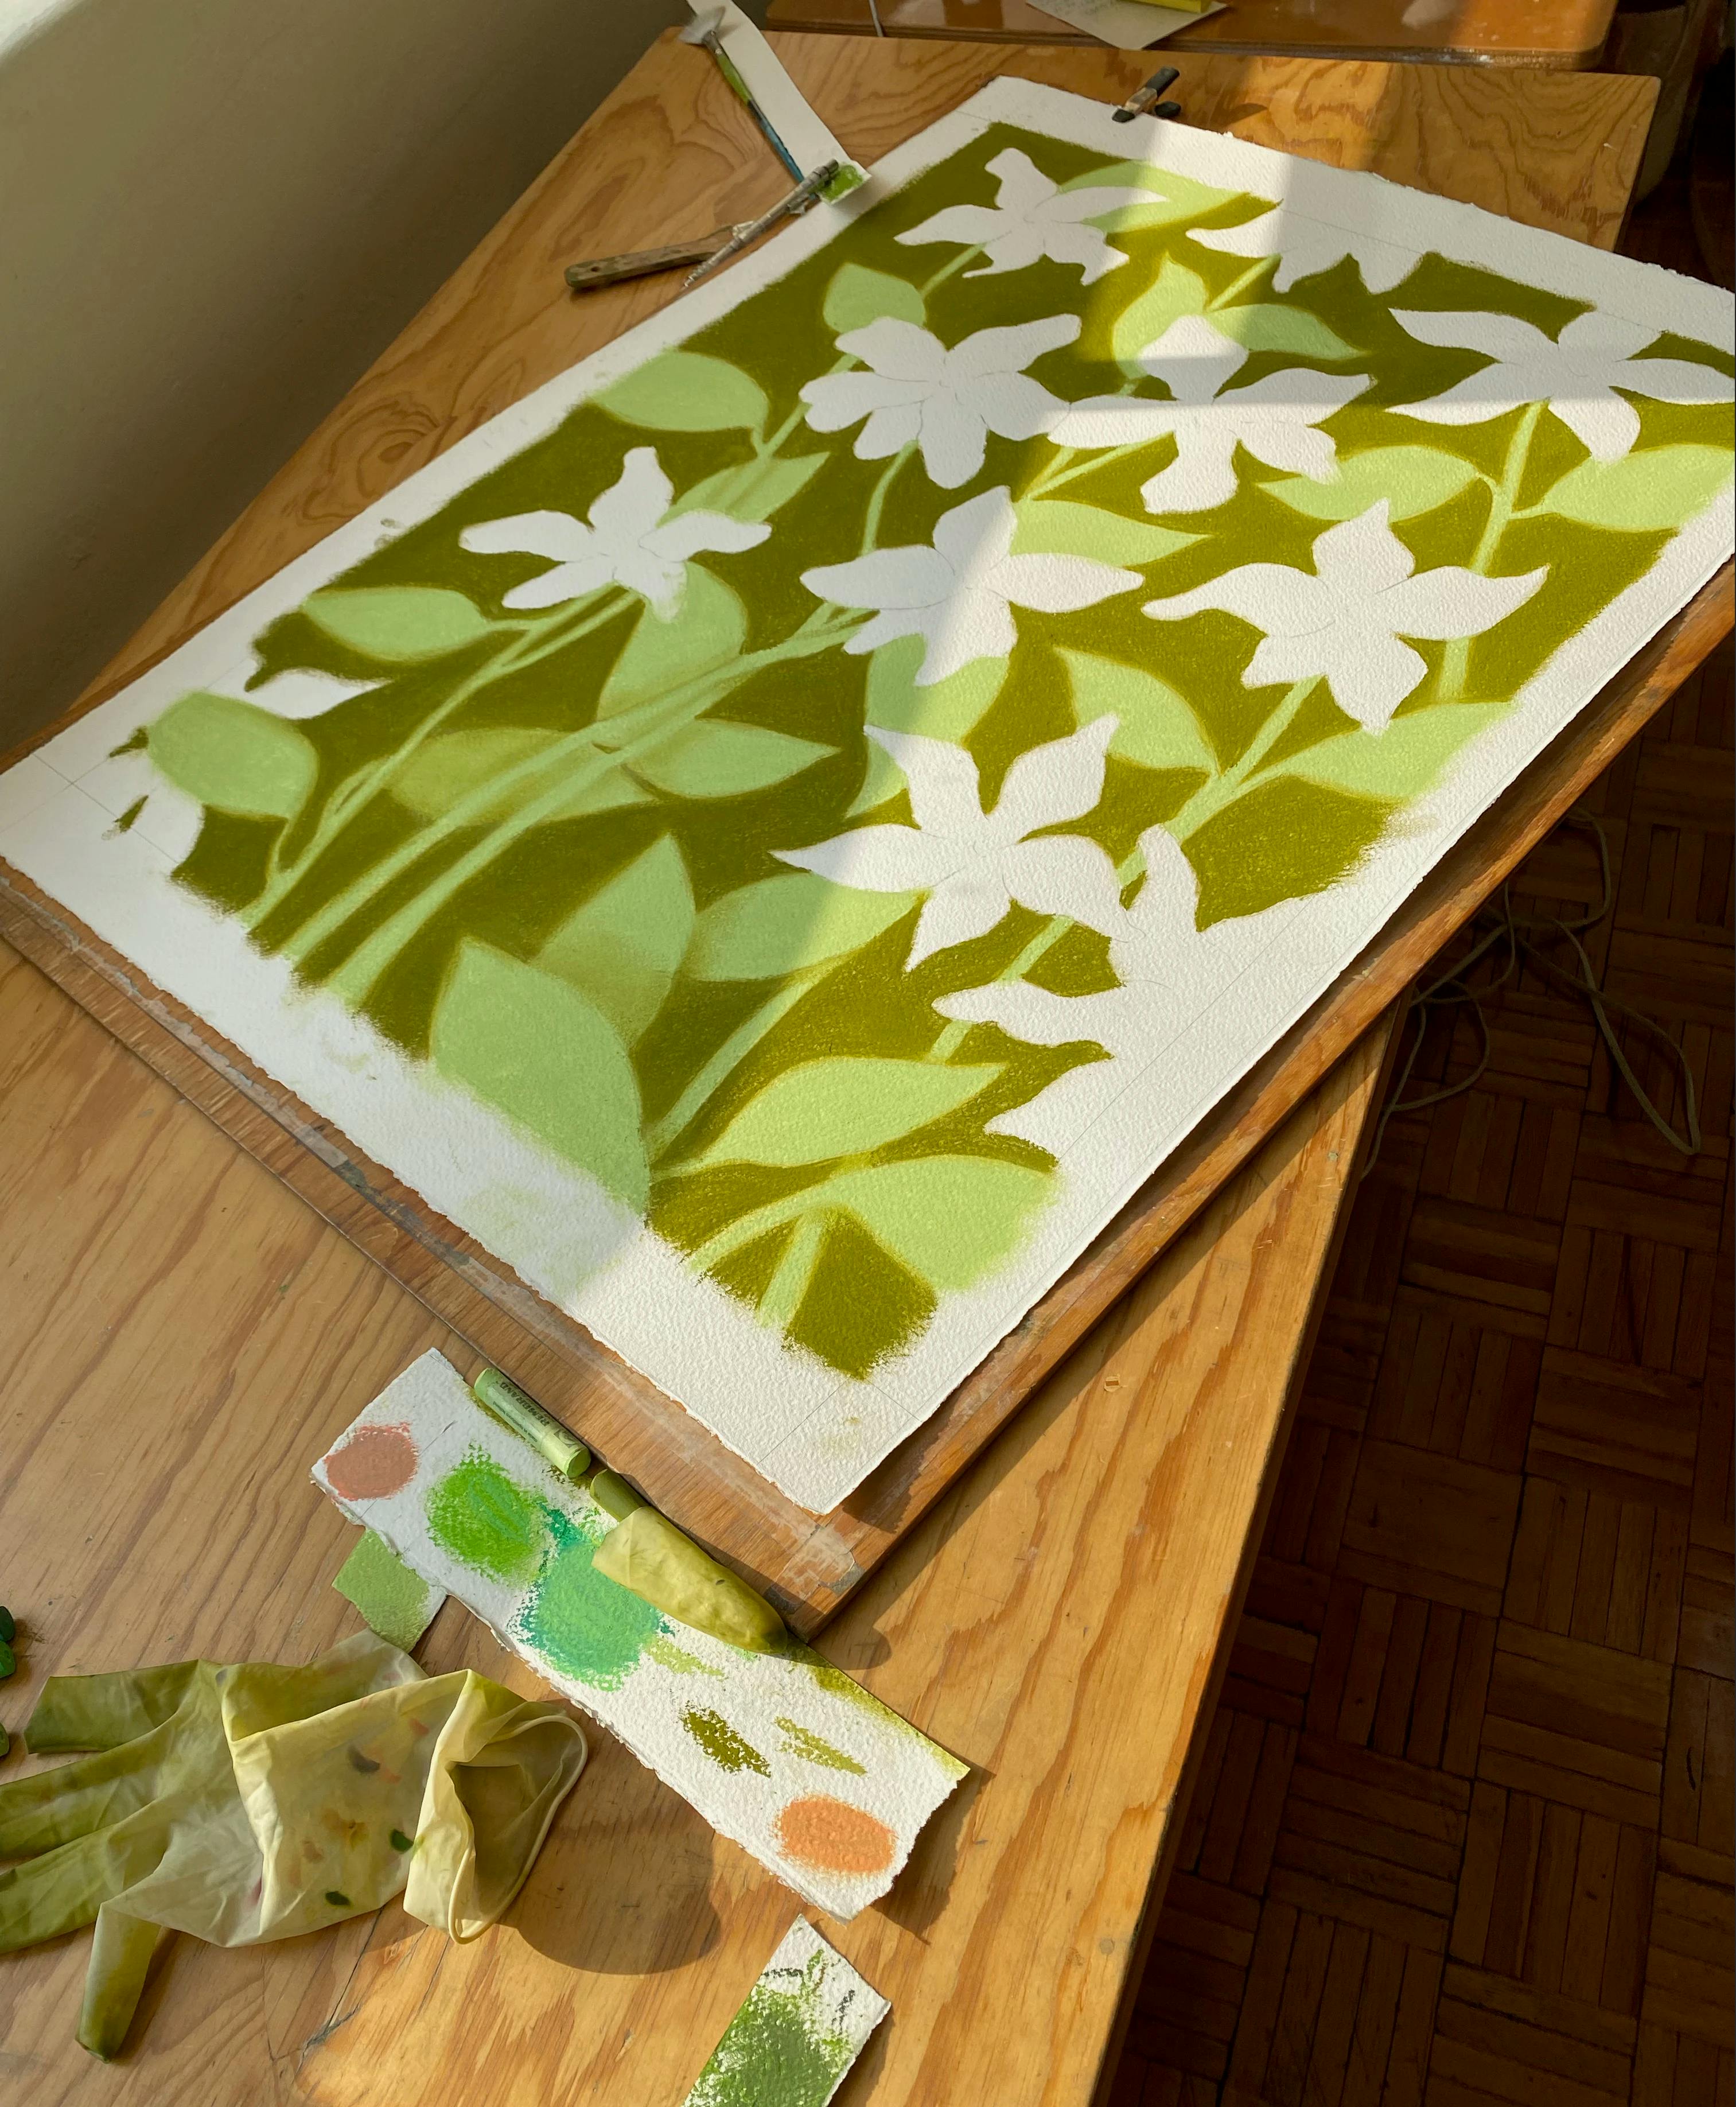 Pastel drawing with green leaves and white flowers by artist Rachel Levit Ruiz on a wooden table in her studio.